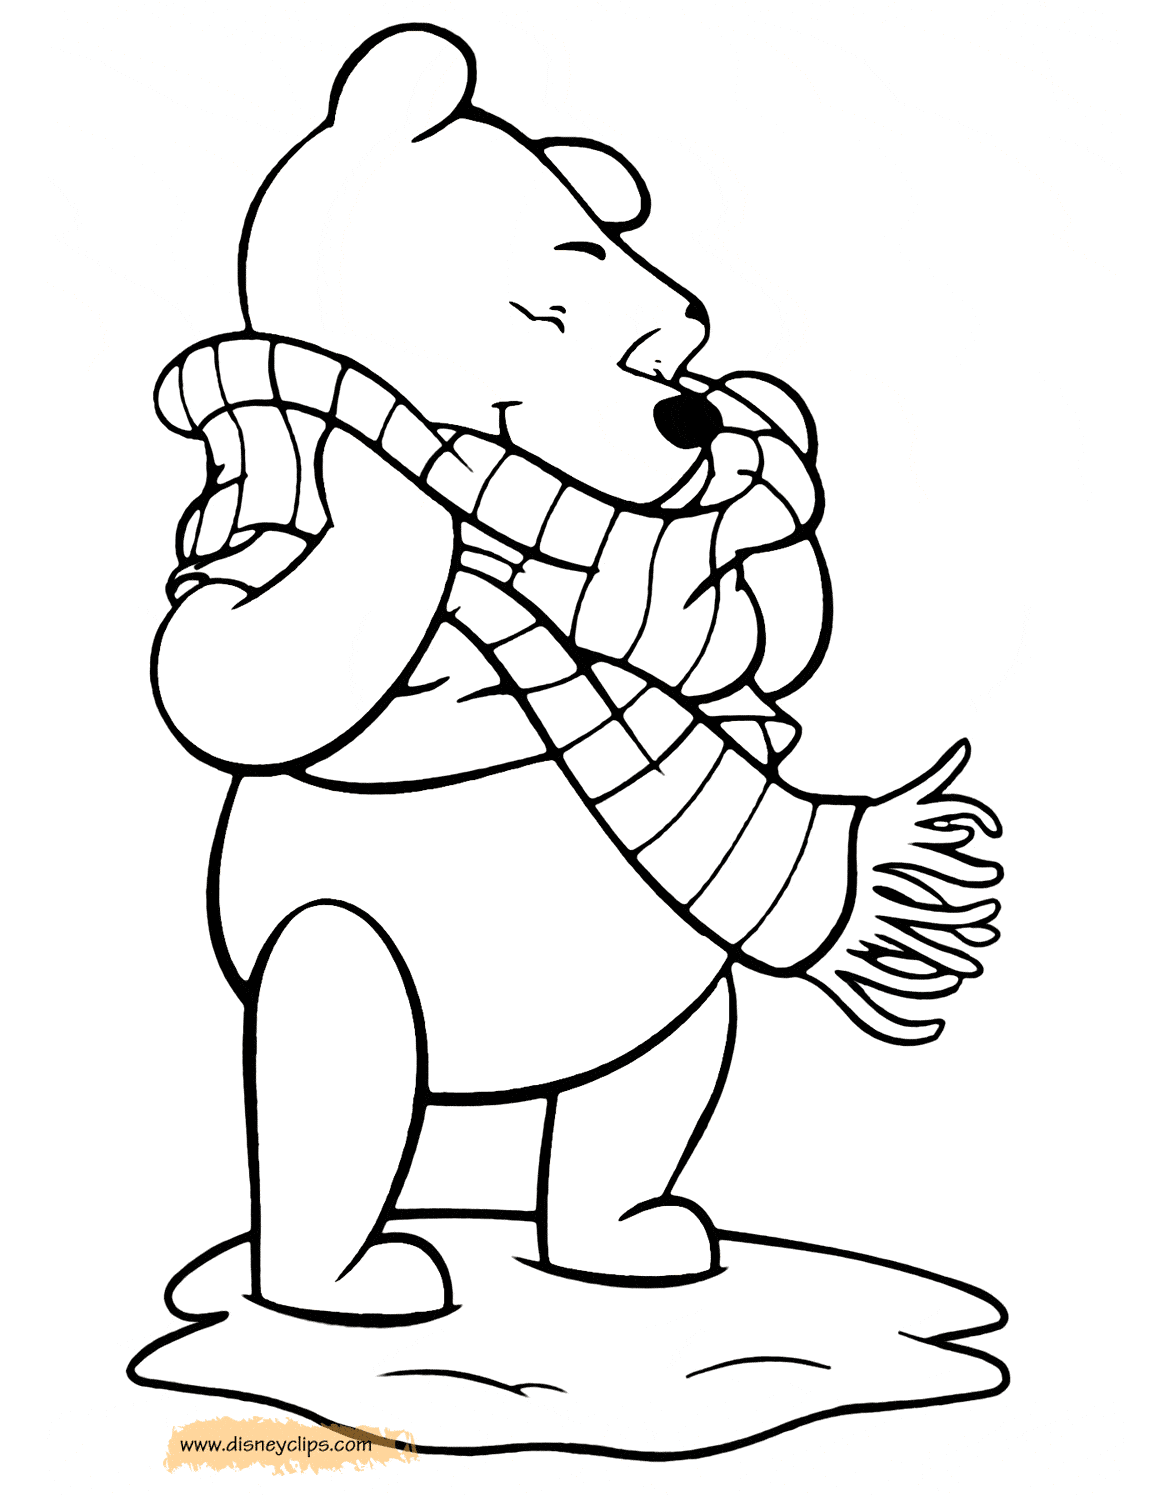 Winnie the Pooh Fall and Winter Coloring Pages | Disneyclips.com